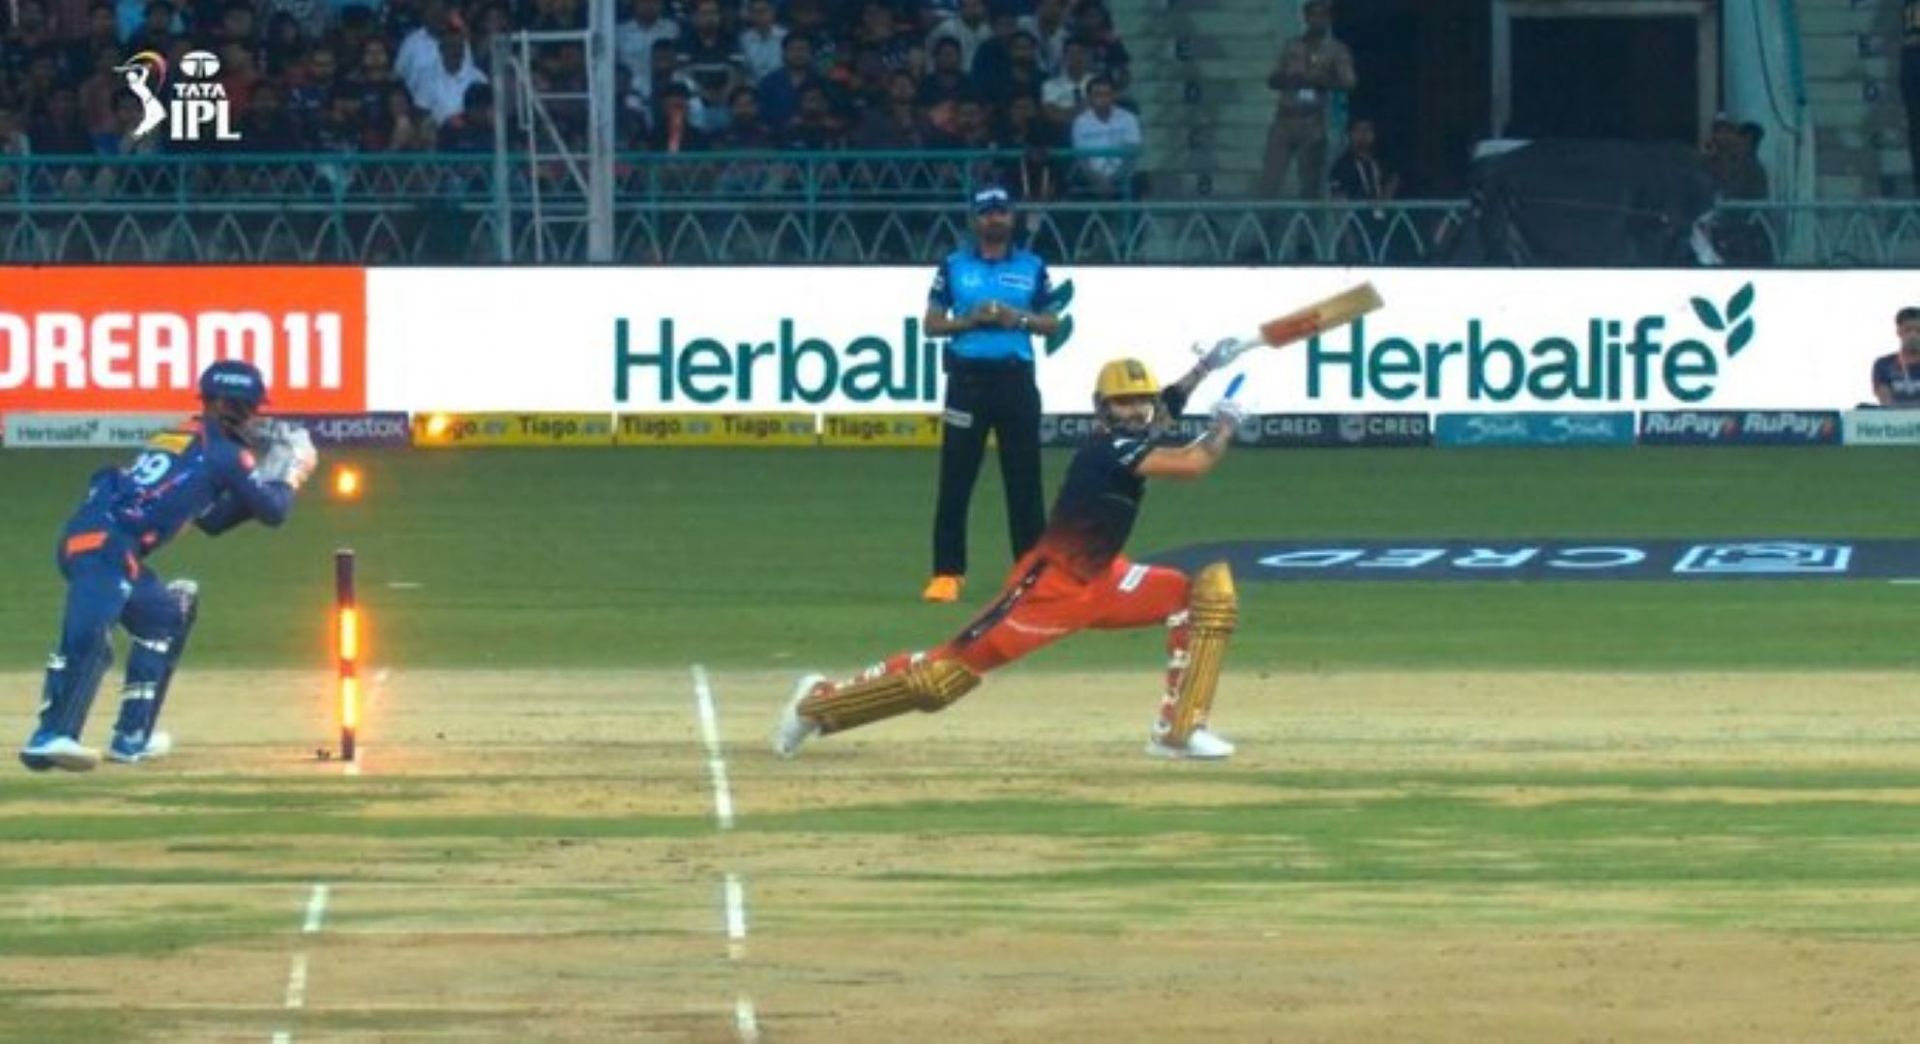 Virat Kohli was stumped for the fifth time in his IPL career